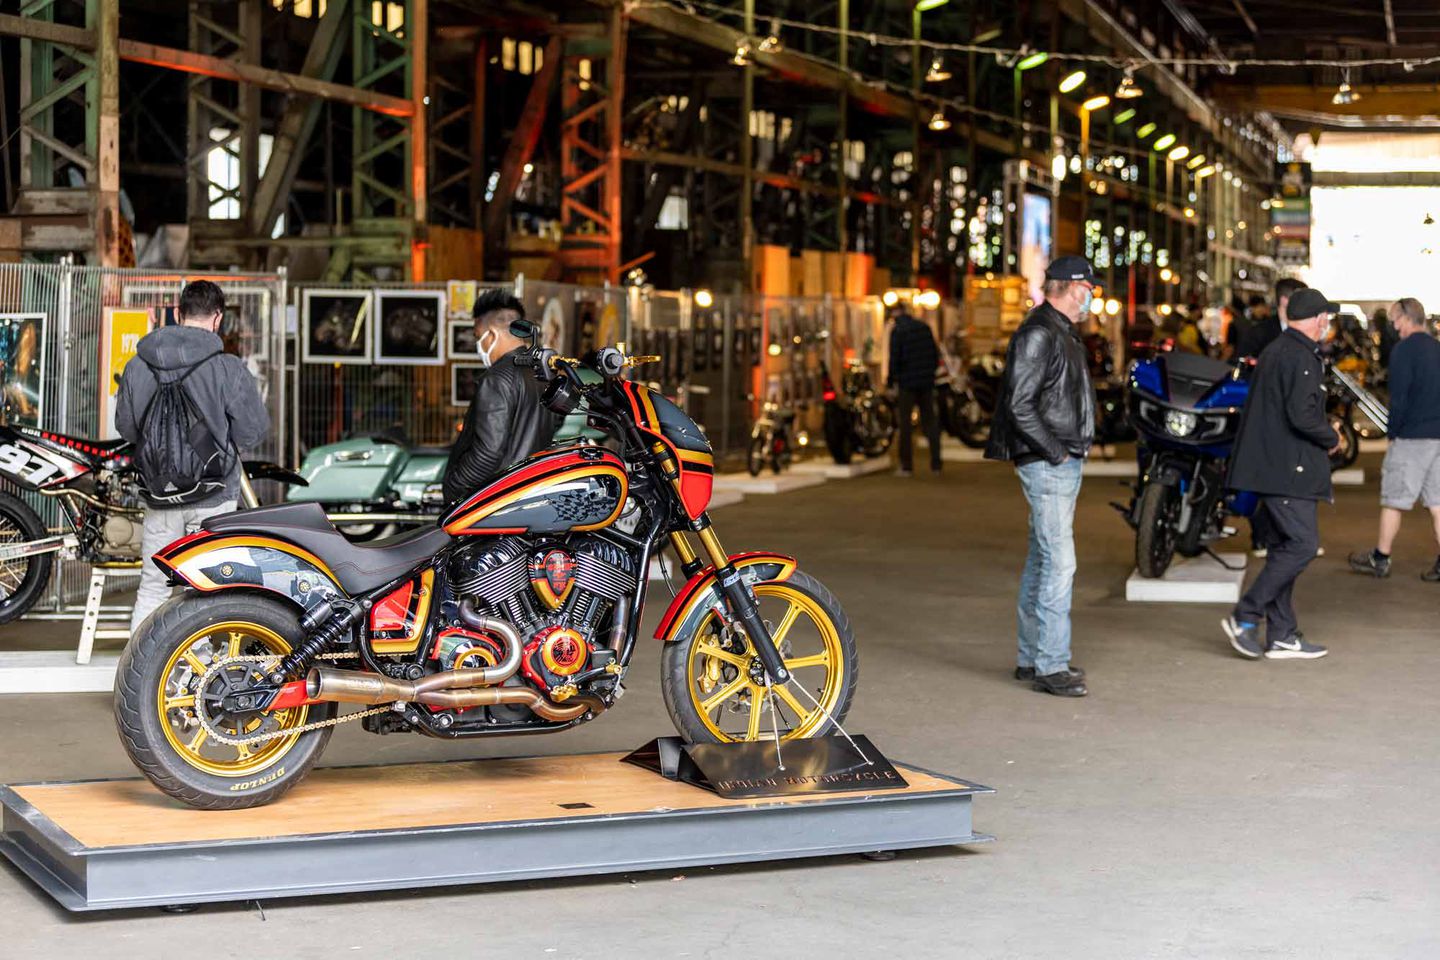 A view of the One Show offerings available in the form of stunt shows, custom motorcycles, and of course the obligatory beautiful people to talk with about builds, bikes and moto beauty of all shapes and sizes.